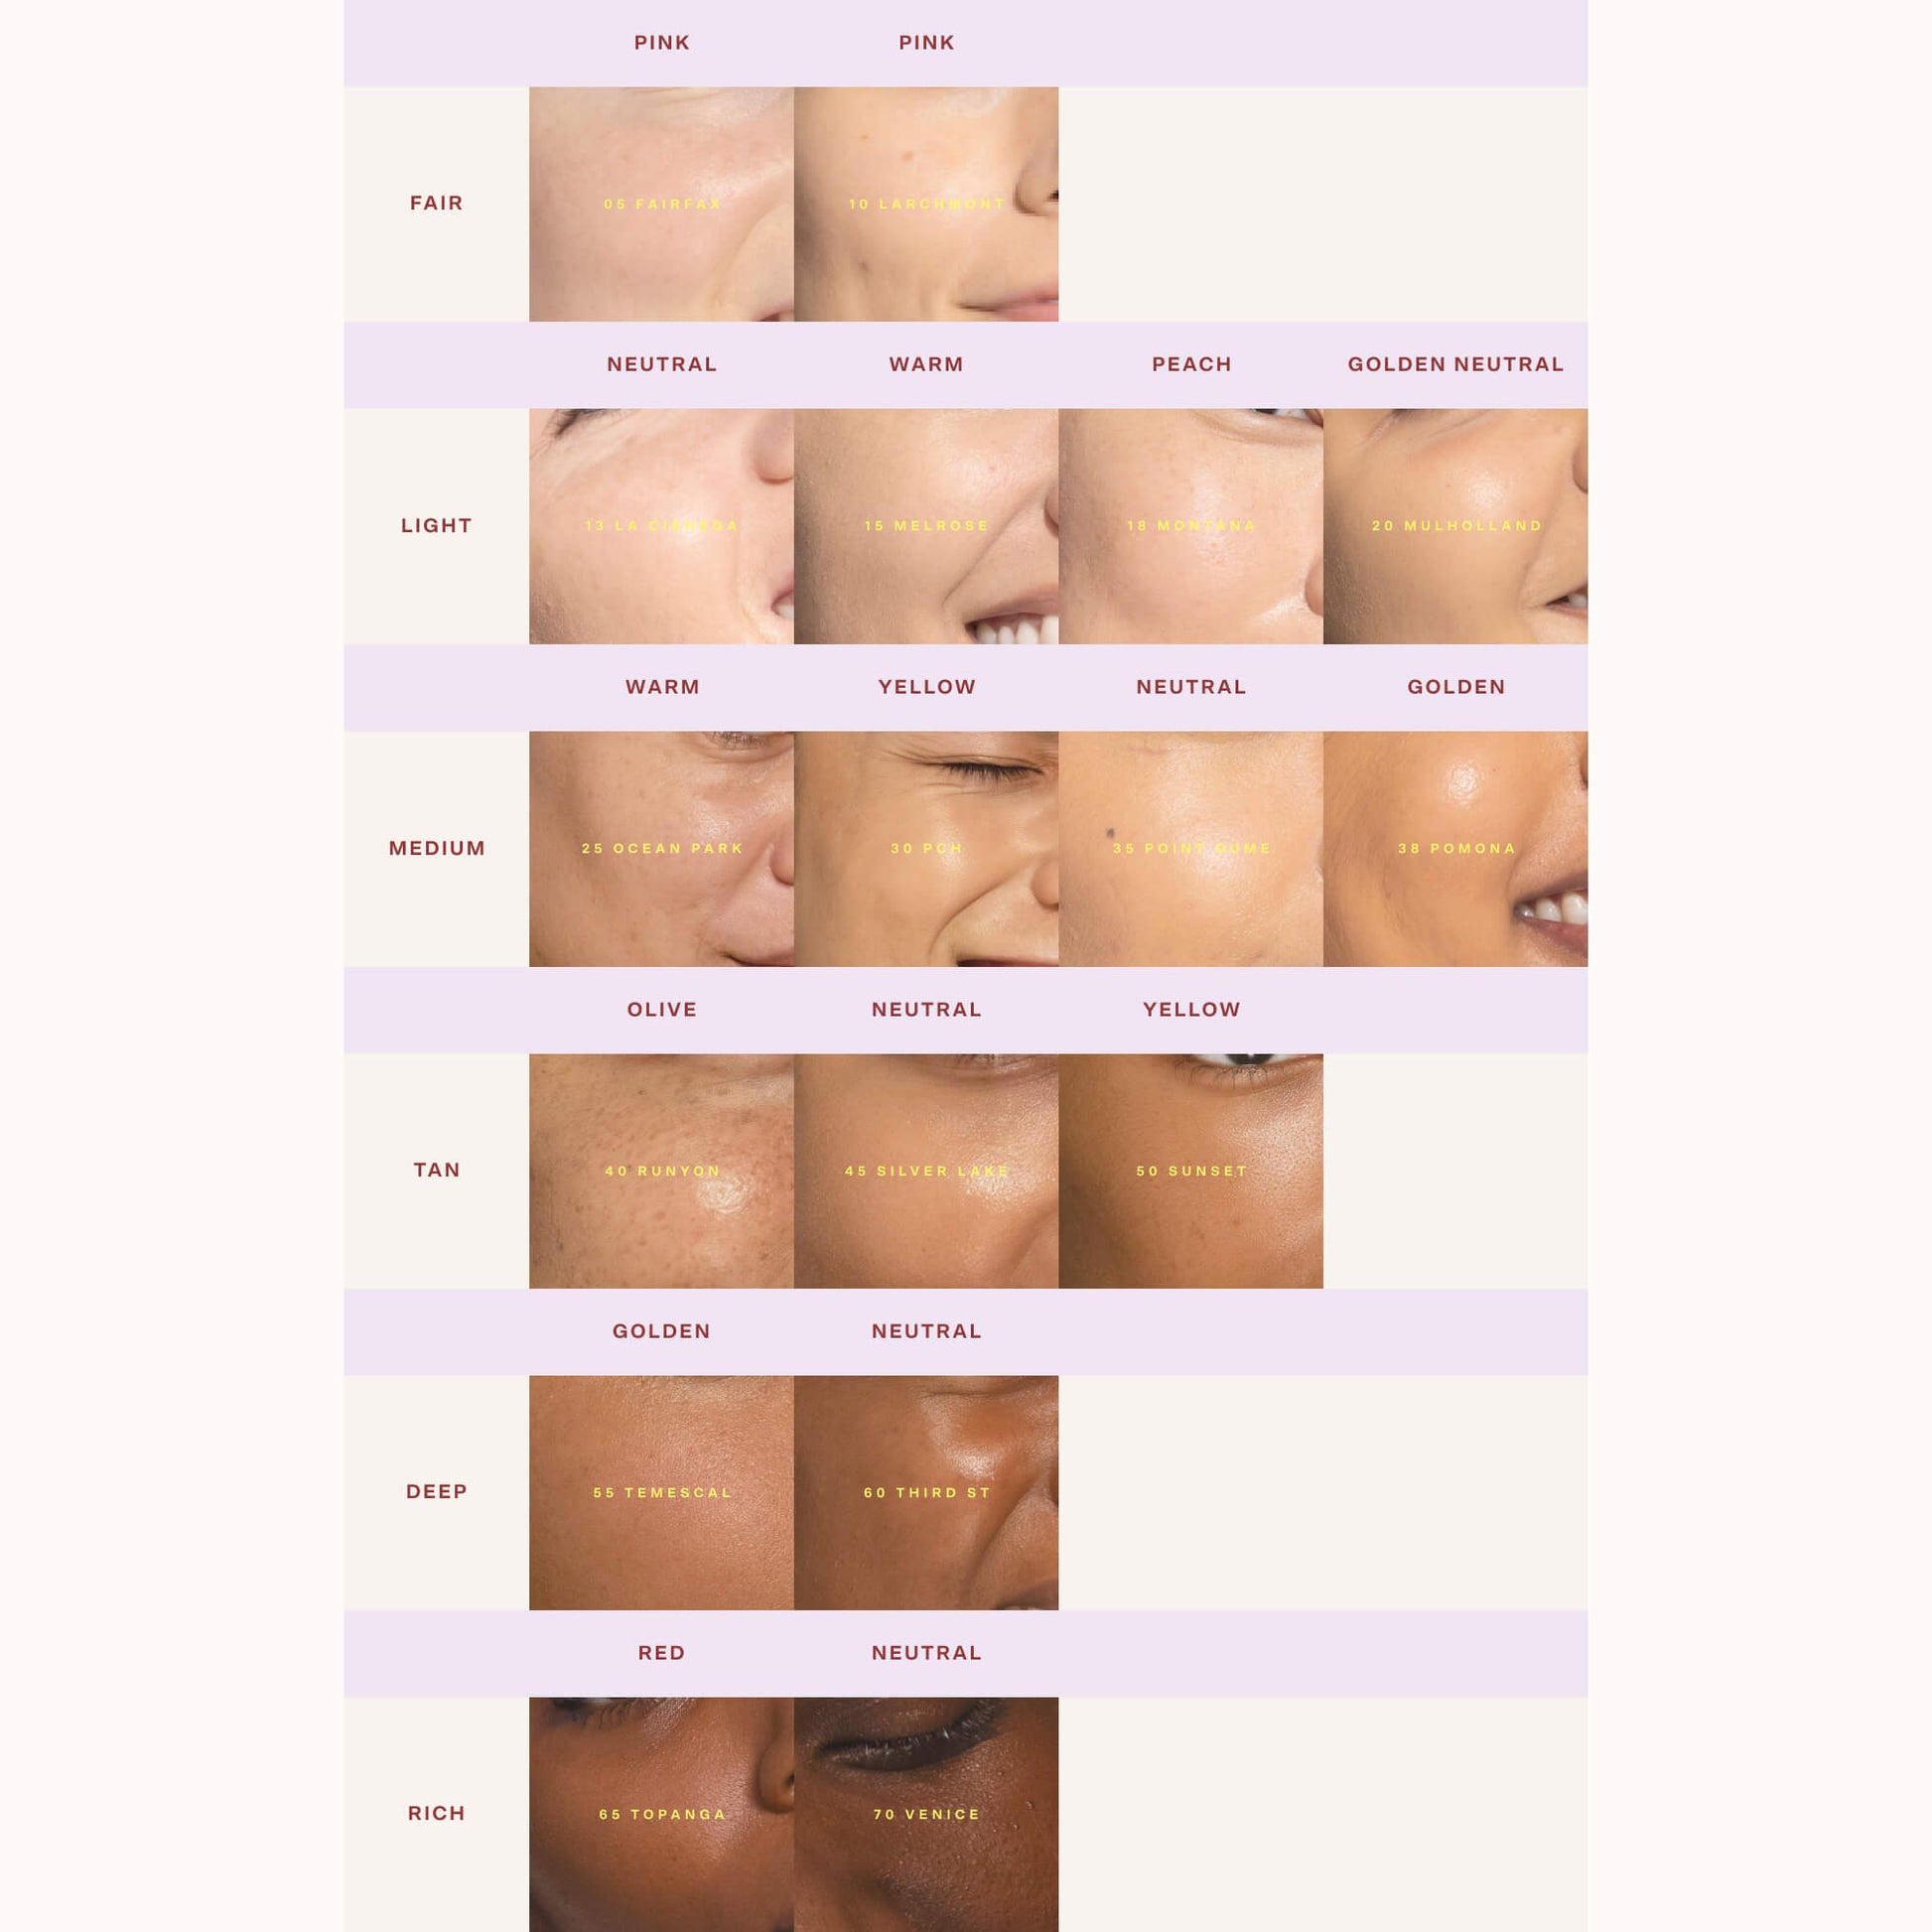 [Shared: Shade match chart showing the undertones of Tower 28 Beauty SunnyDays SPF 30 Tinted Sunscreen shades